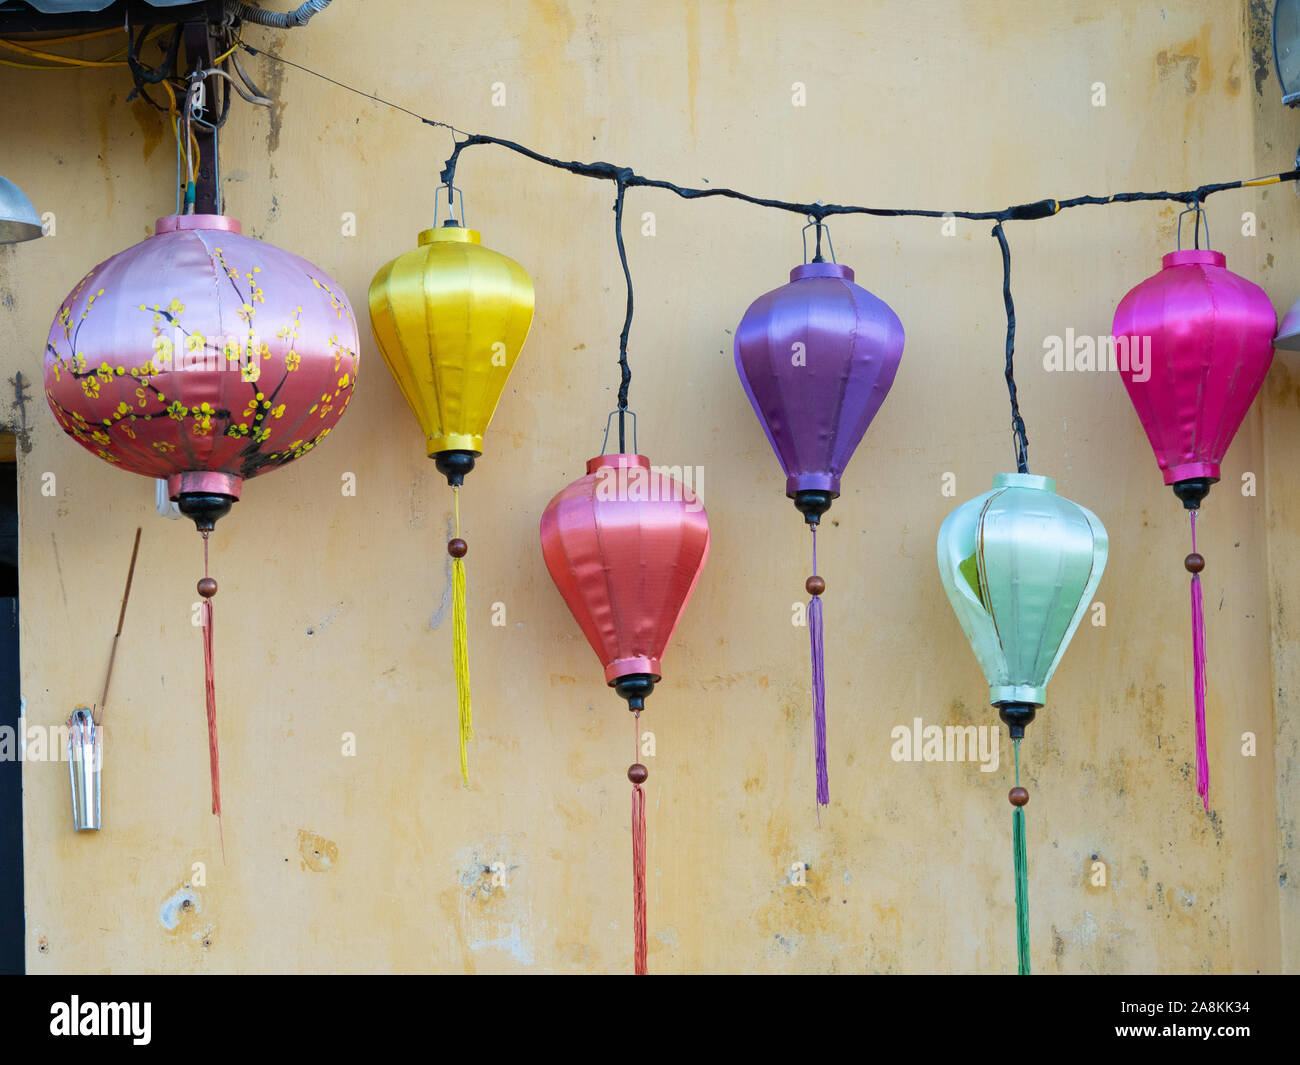 Six satin fabric lanterns in pink, yellow, purple, and mint green hanging against an weathered, gold stucco building. Stock Photo